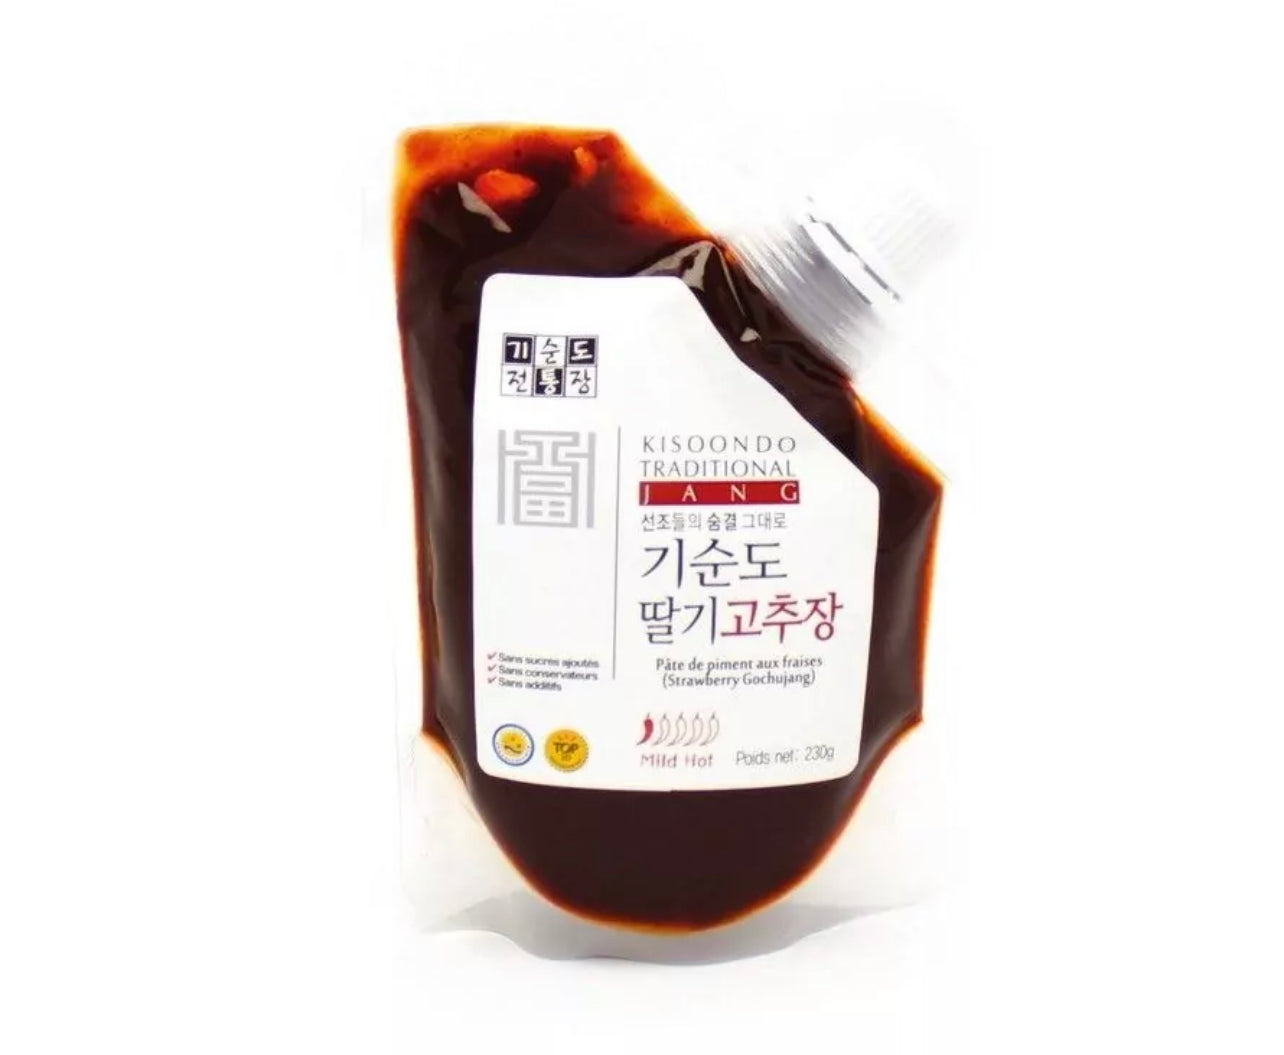 Korean red chili paste with strawberries (gochujang) - 230g